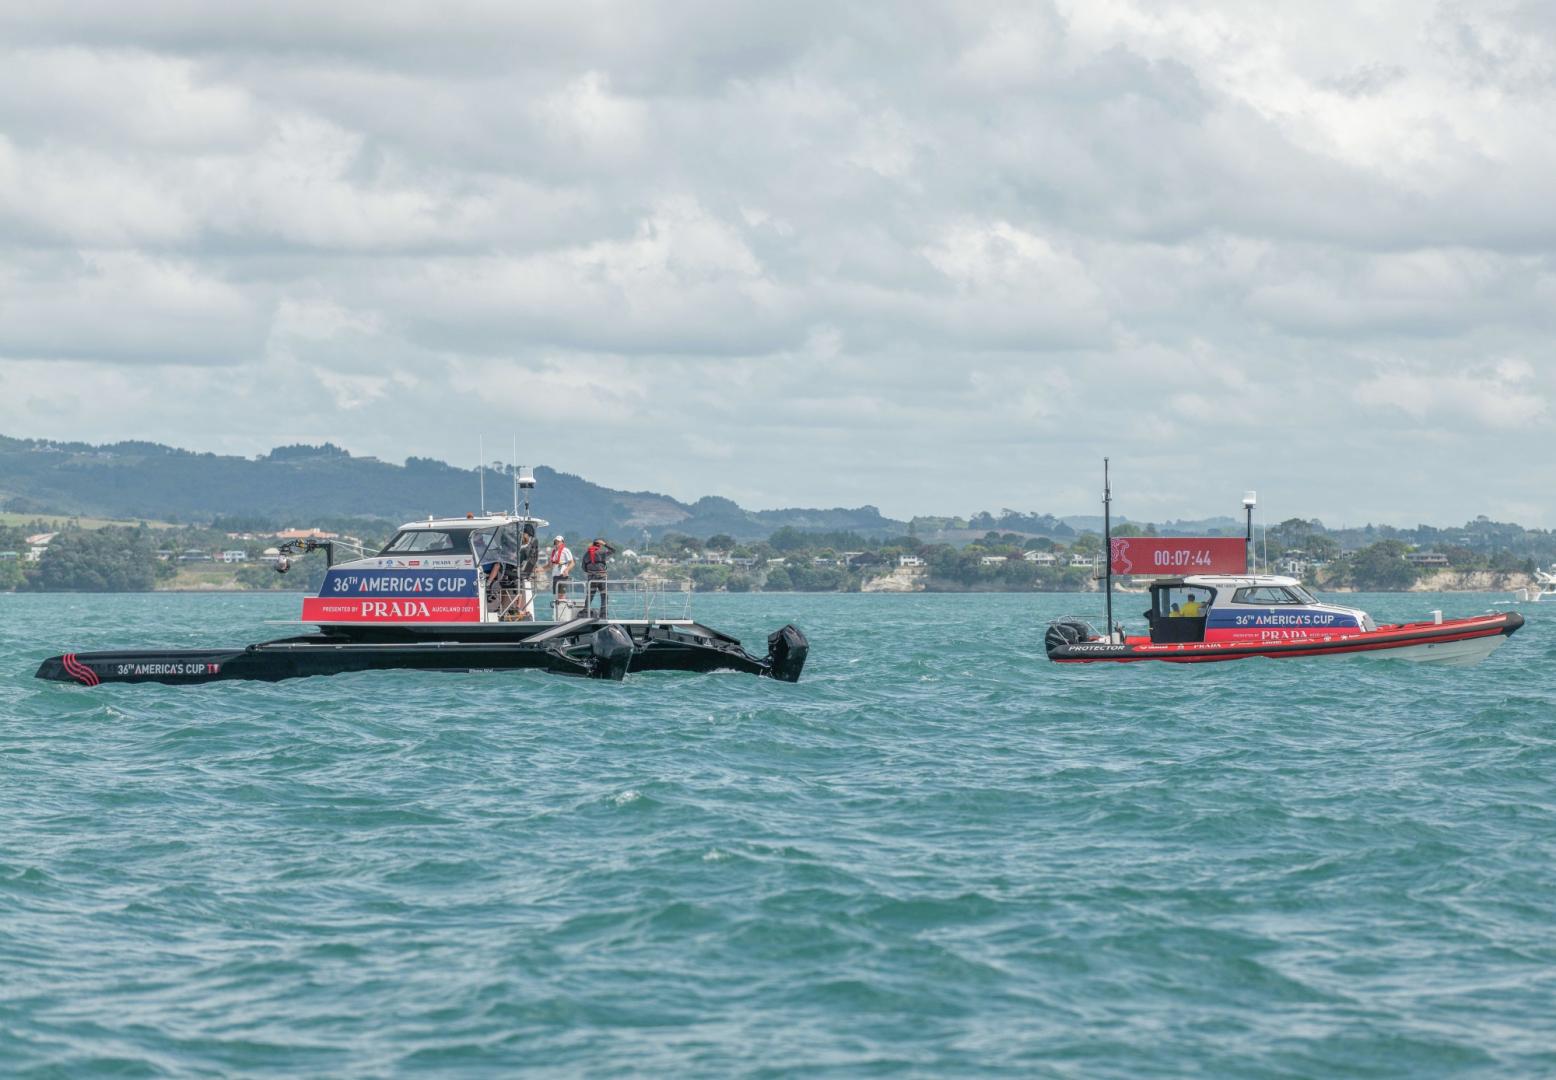 36th America’s Cup had its first successful test run